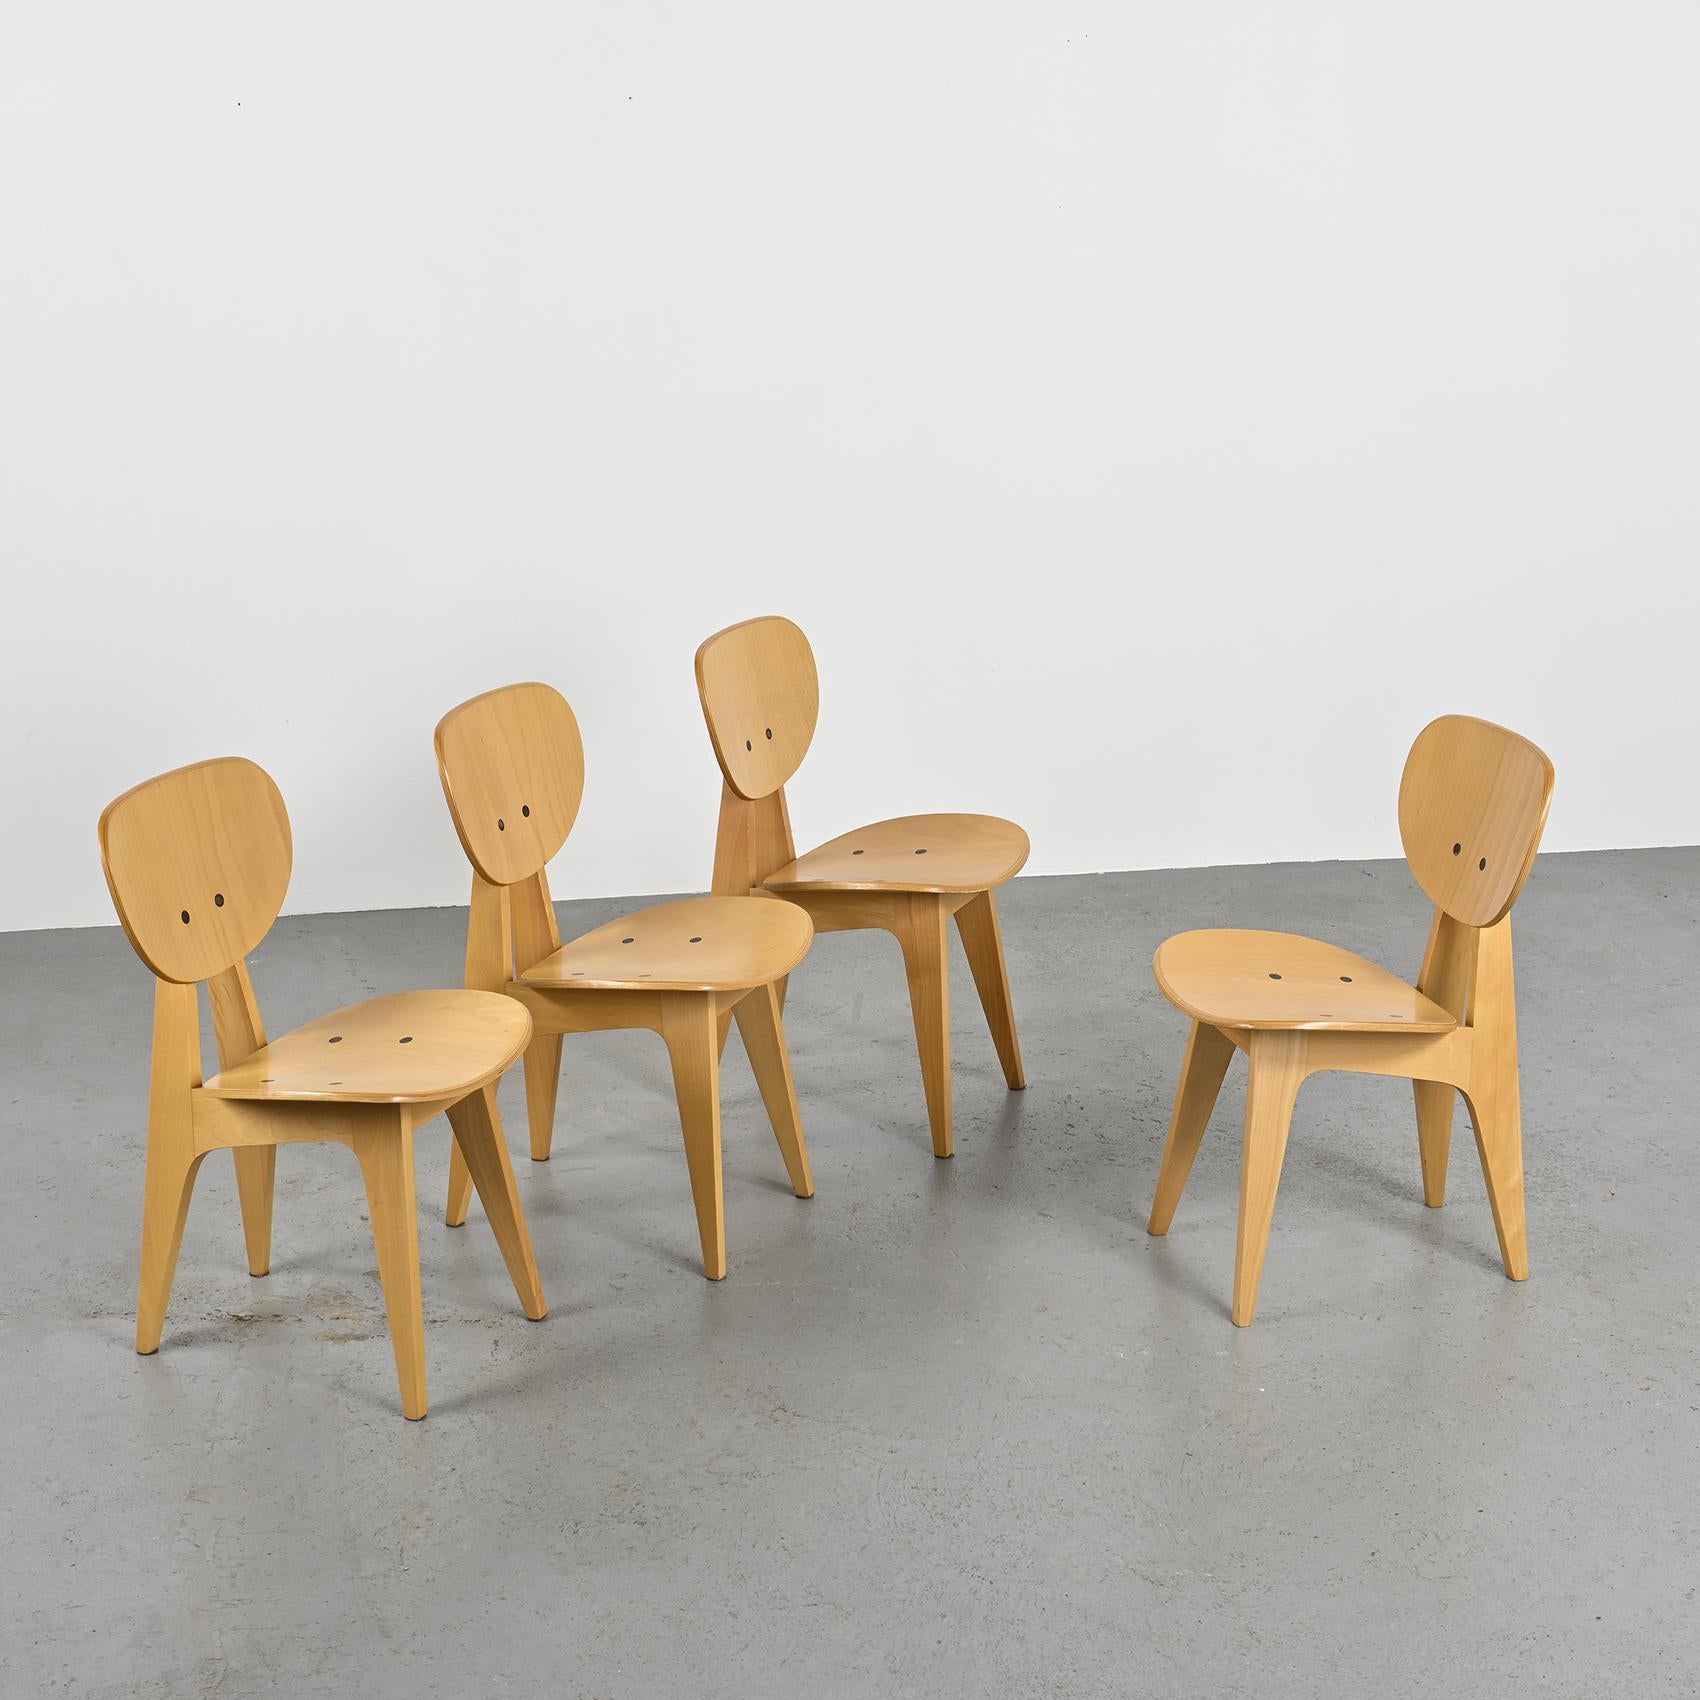 Set of four chairs, model 3221, envisioned in the 1950s by the Japanese designer and architect Junzo Sakakura, known for his collaboration with Le Corbusier. These chairs exude the sophistication and functional ingenuity inherent to Sakakura,